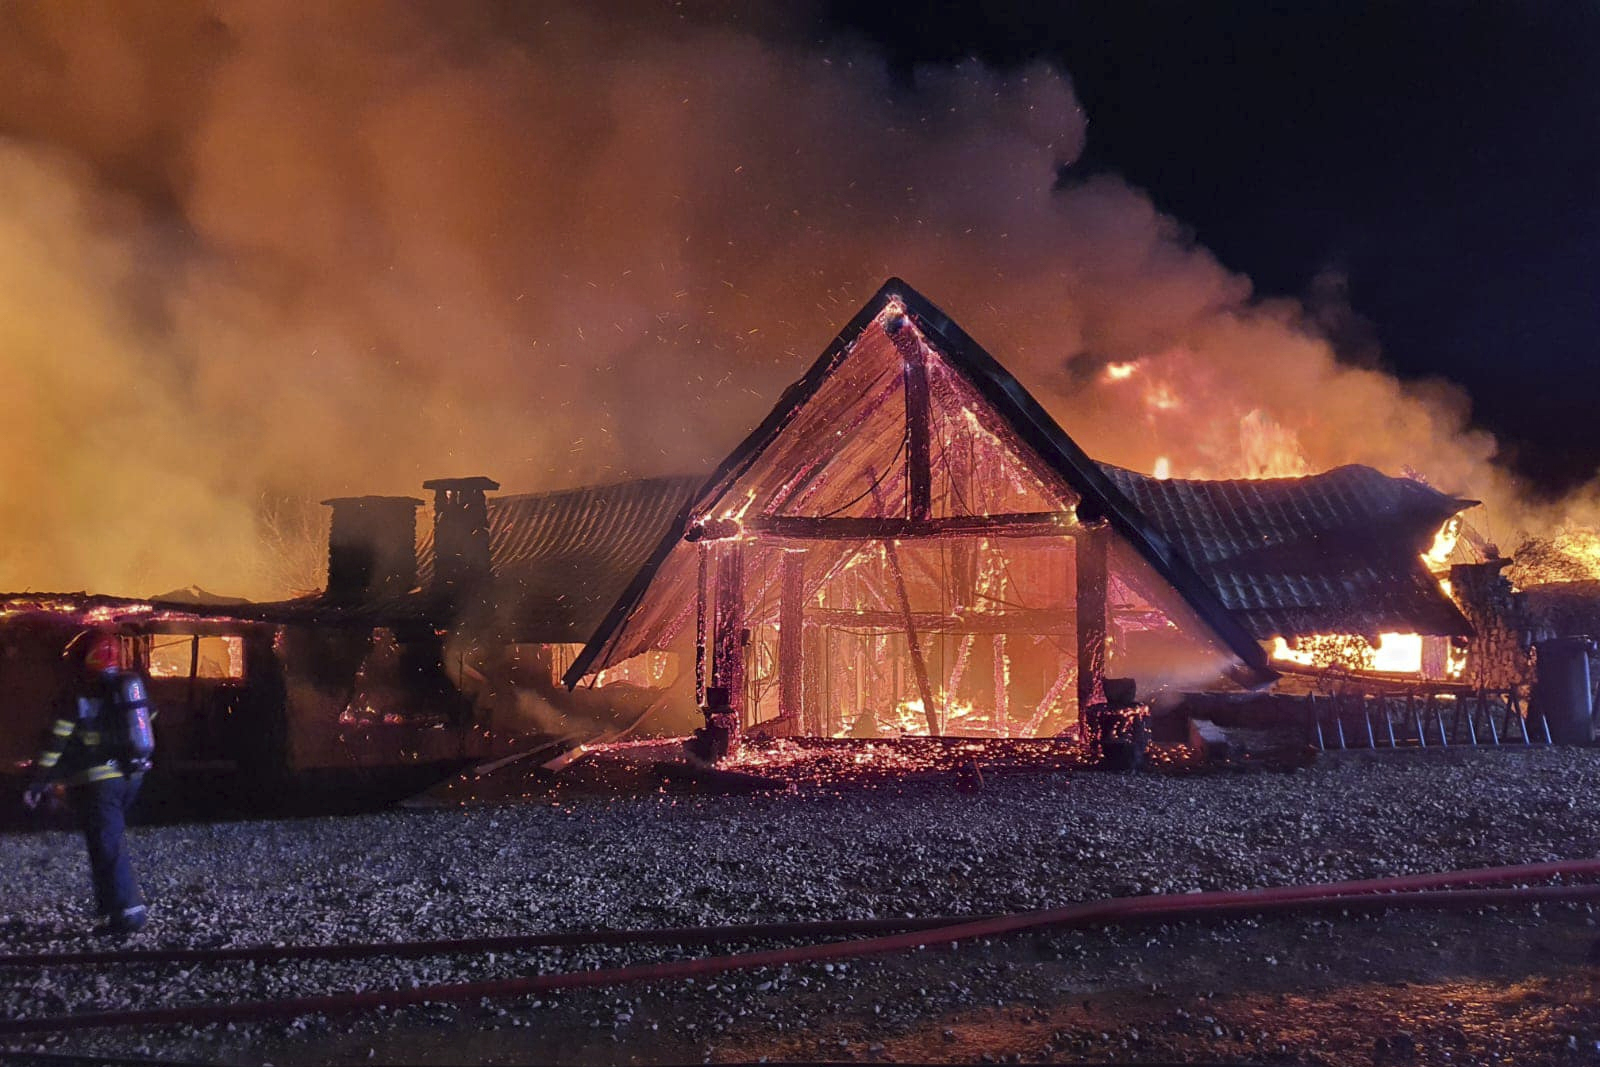 No less than 5 folks lifeless together with a baby as horror blaze breaks out at B&B in Romania whereas one other three are lacking